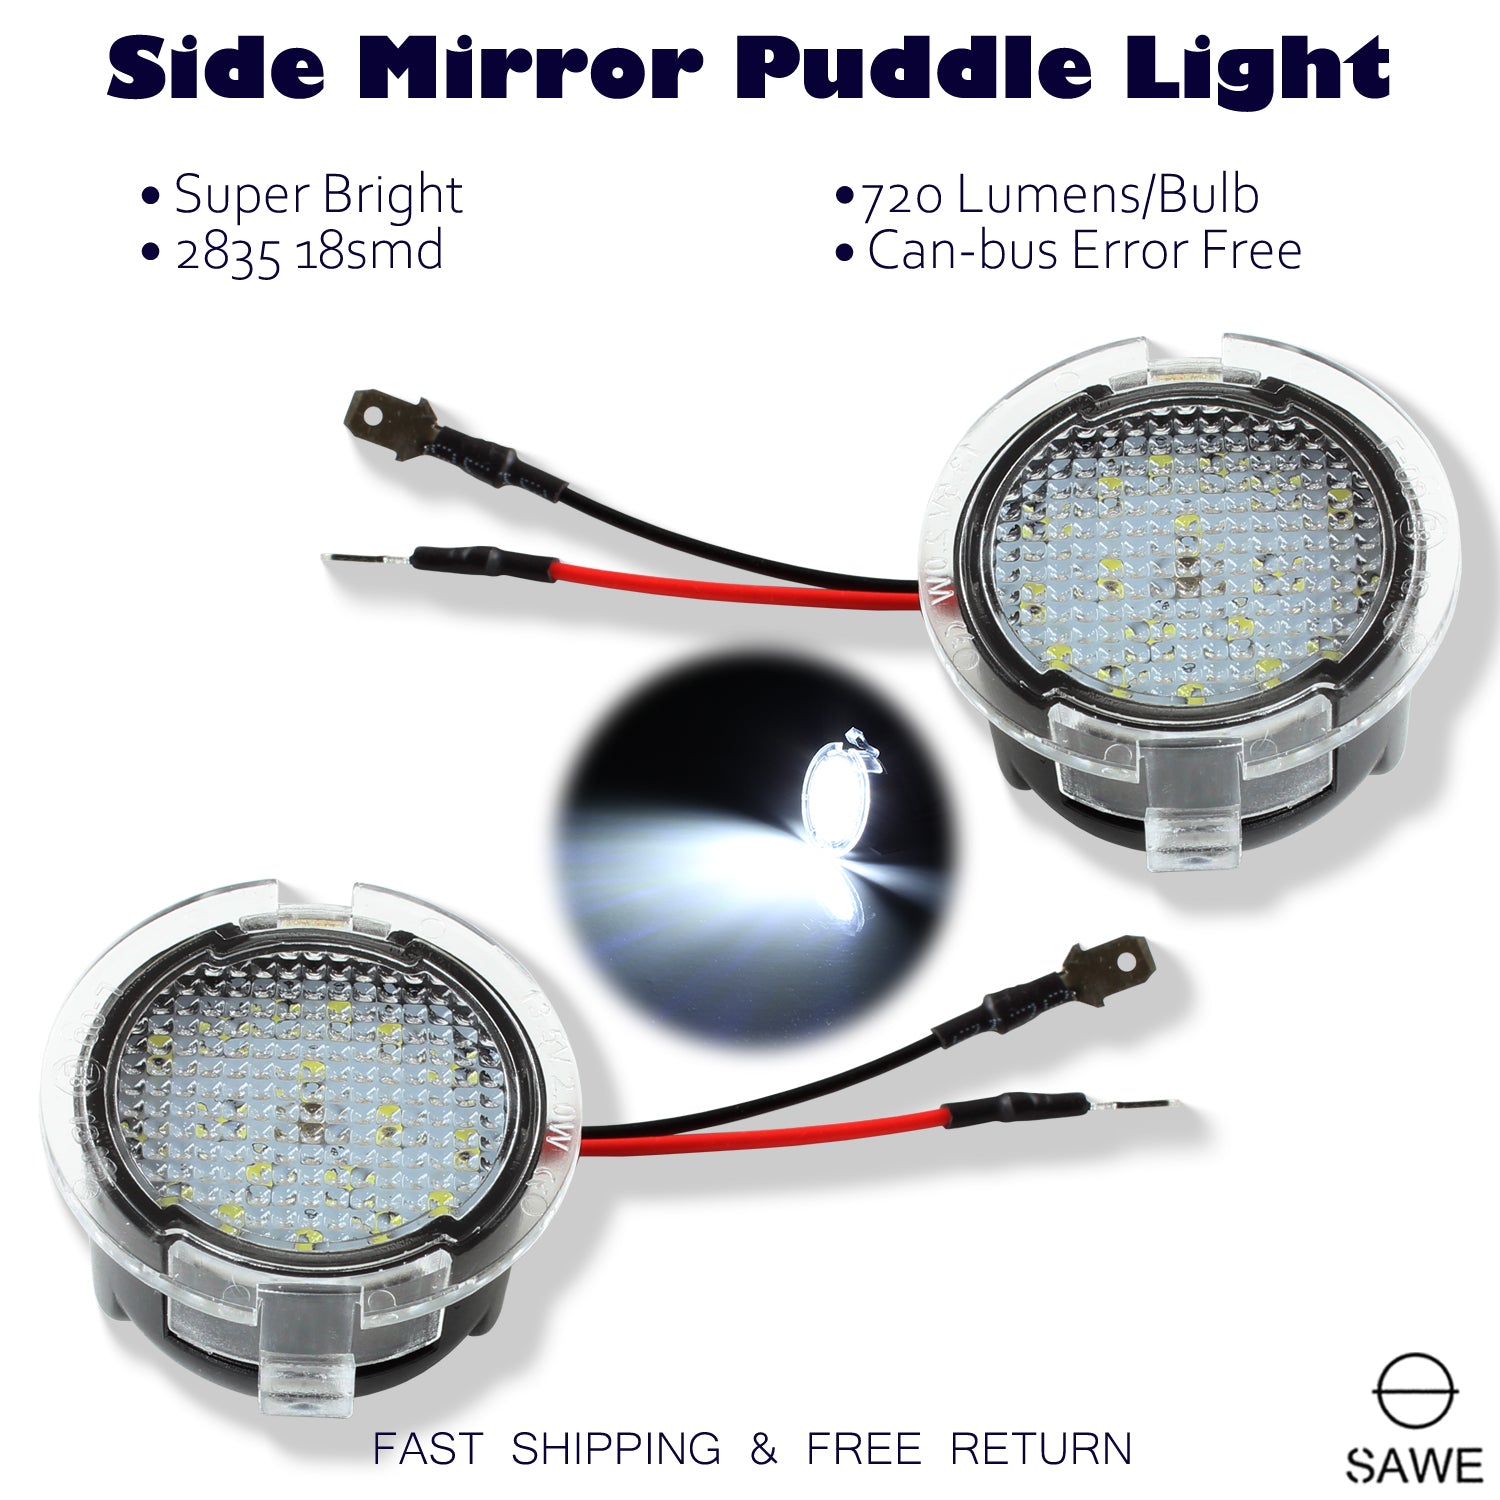 LED Side Mirror Puddle Light Kit For Ford F-150 Explorer Expedition Edge Fusion Lincoln MKS MKT